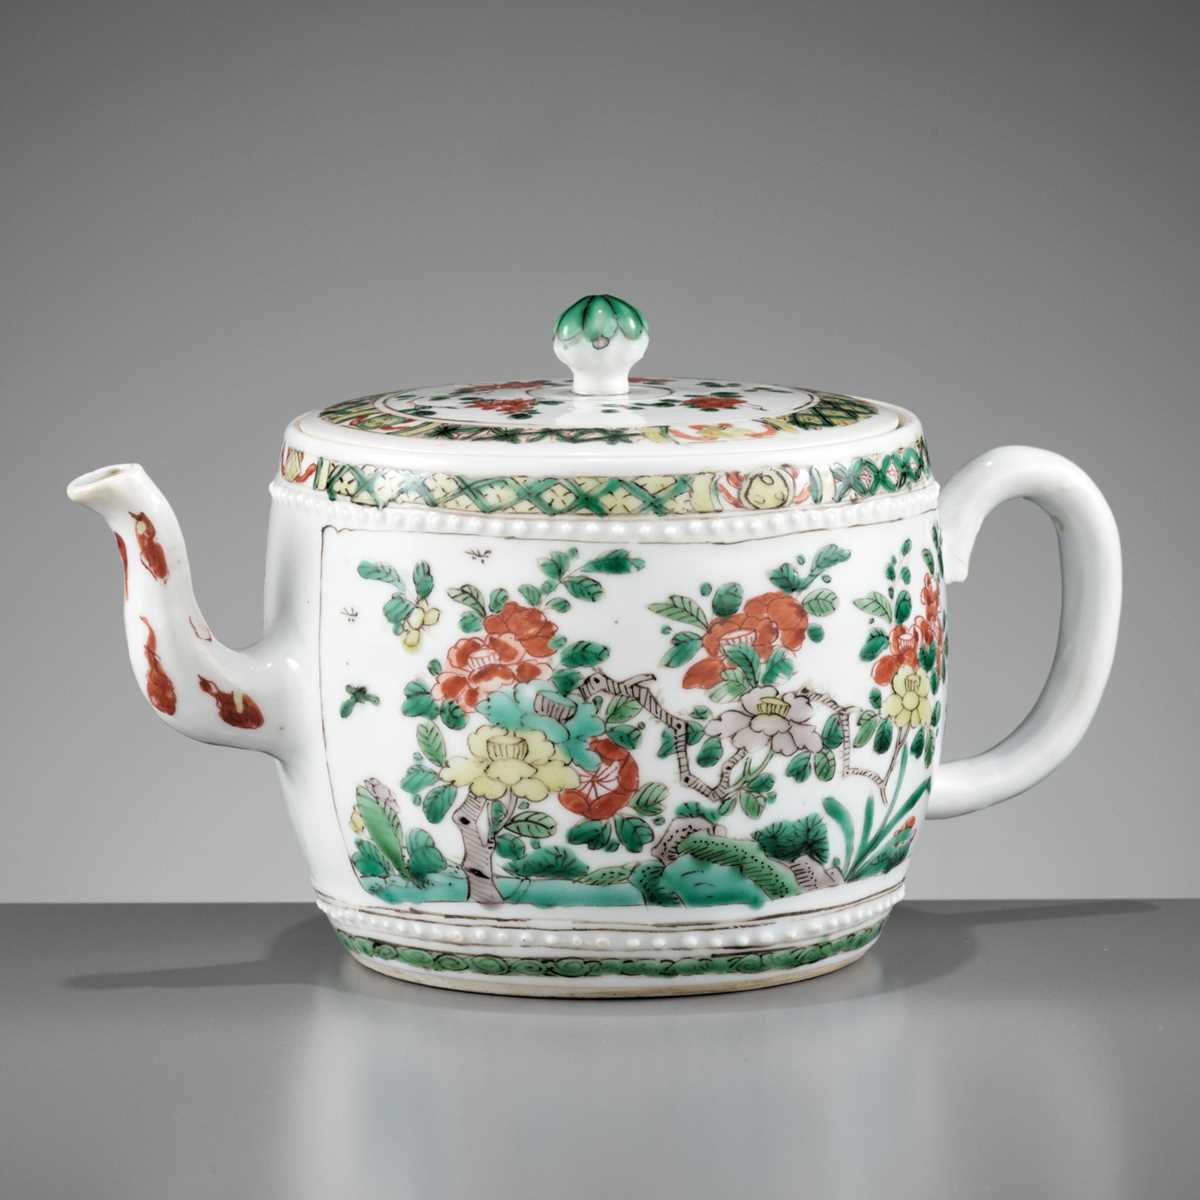 Lot 84 - A FAMILLE VERTE BARREL-SHAPED TEAPOT AND COVER, KANGXI PERIOD